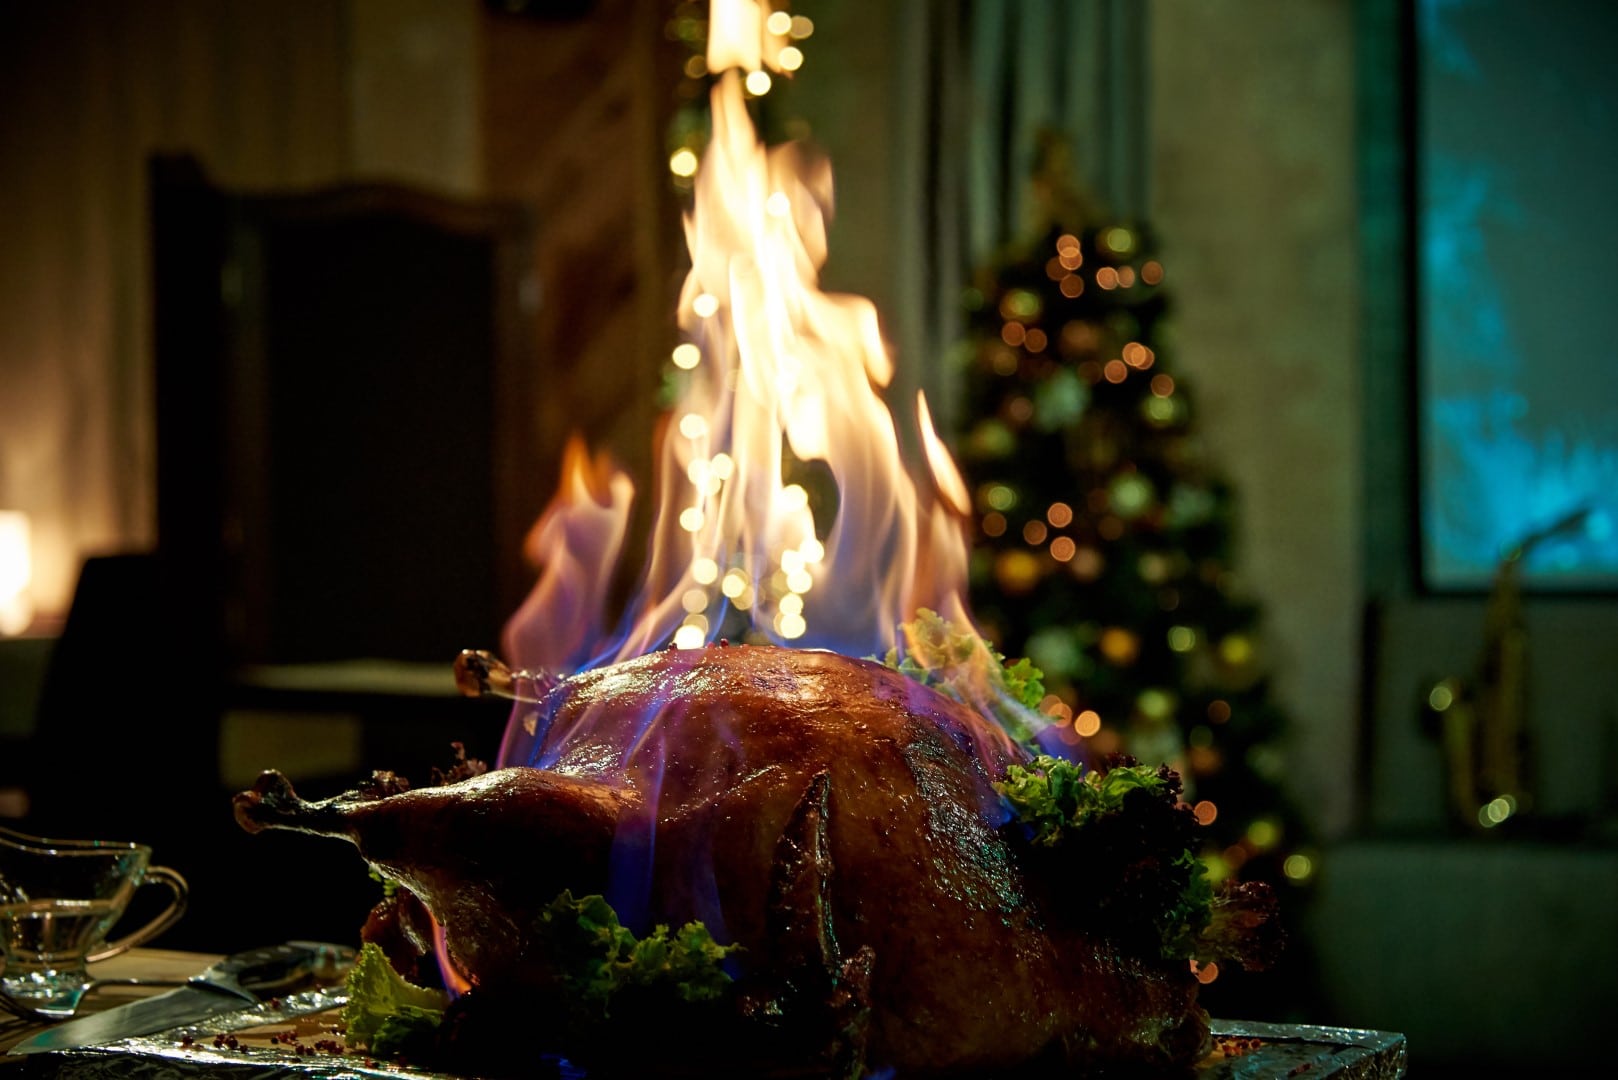 Burning baked turkey on a tray in a dimly lit room.